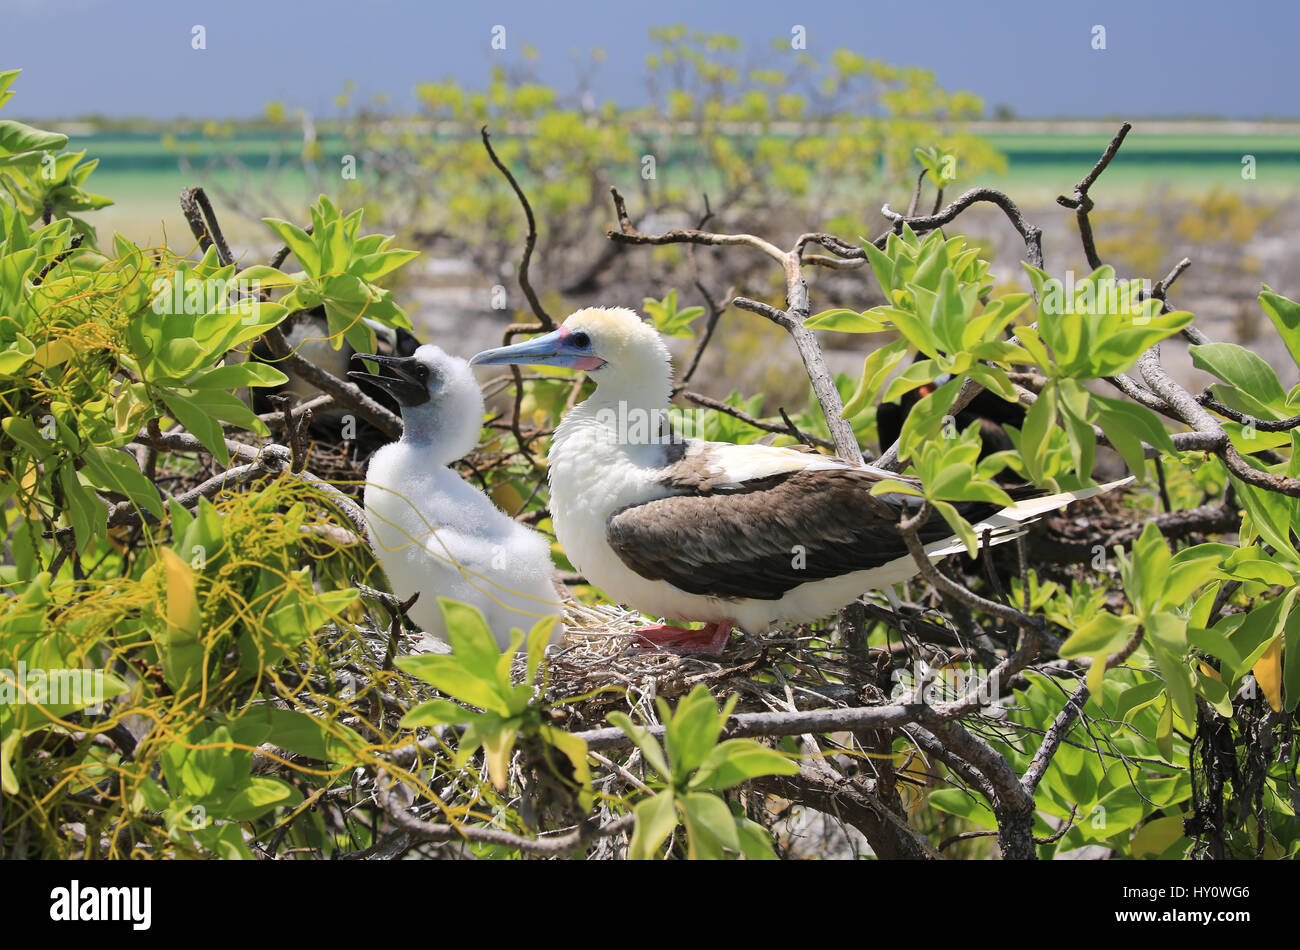 Red-footed booby bird with a chick in the nest, Christmas Island, Kiribati Stock Photo